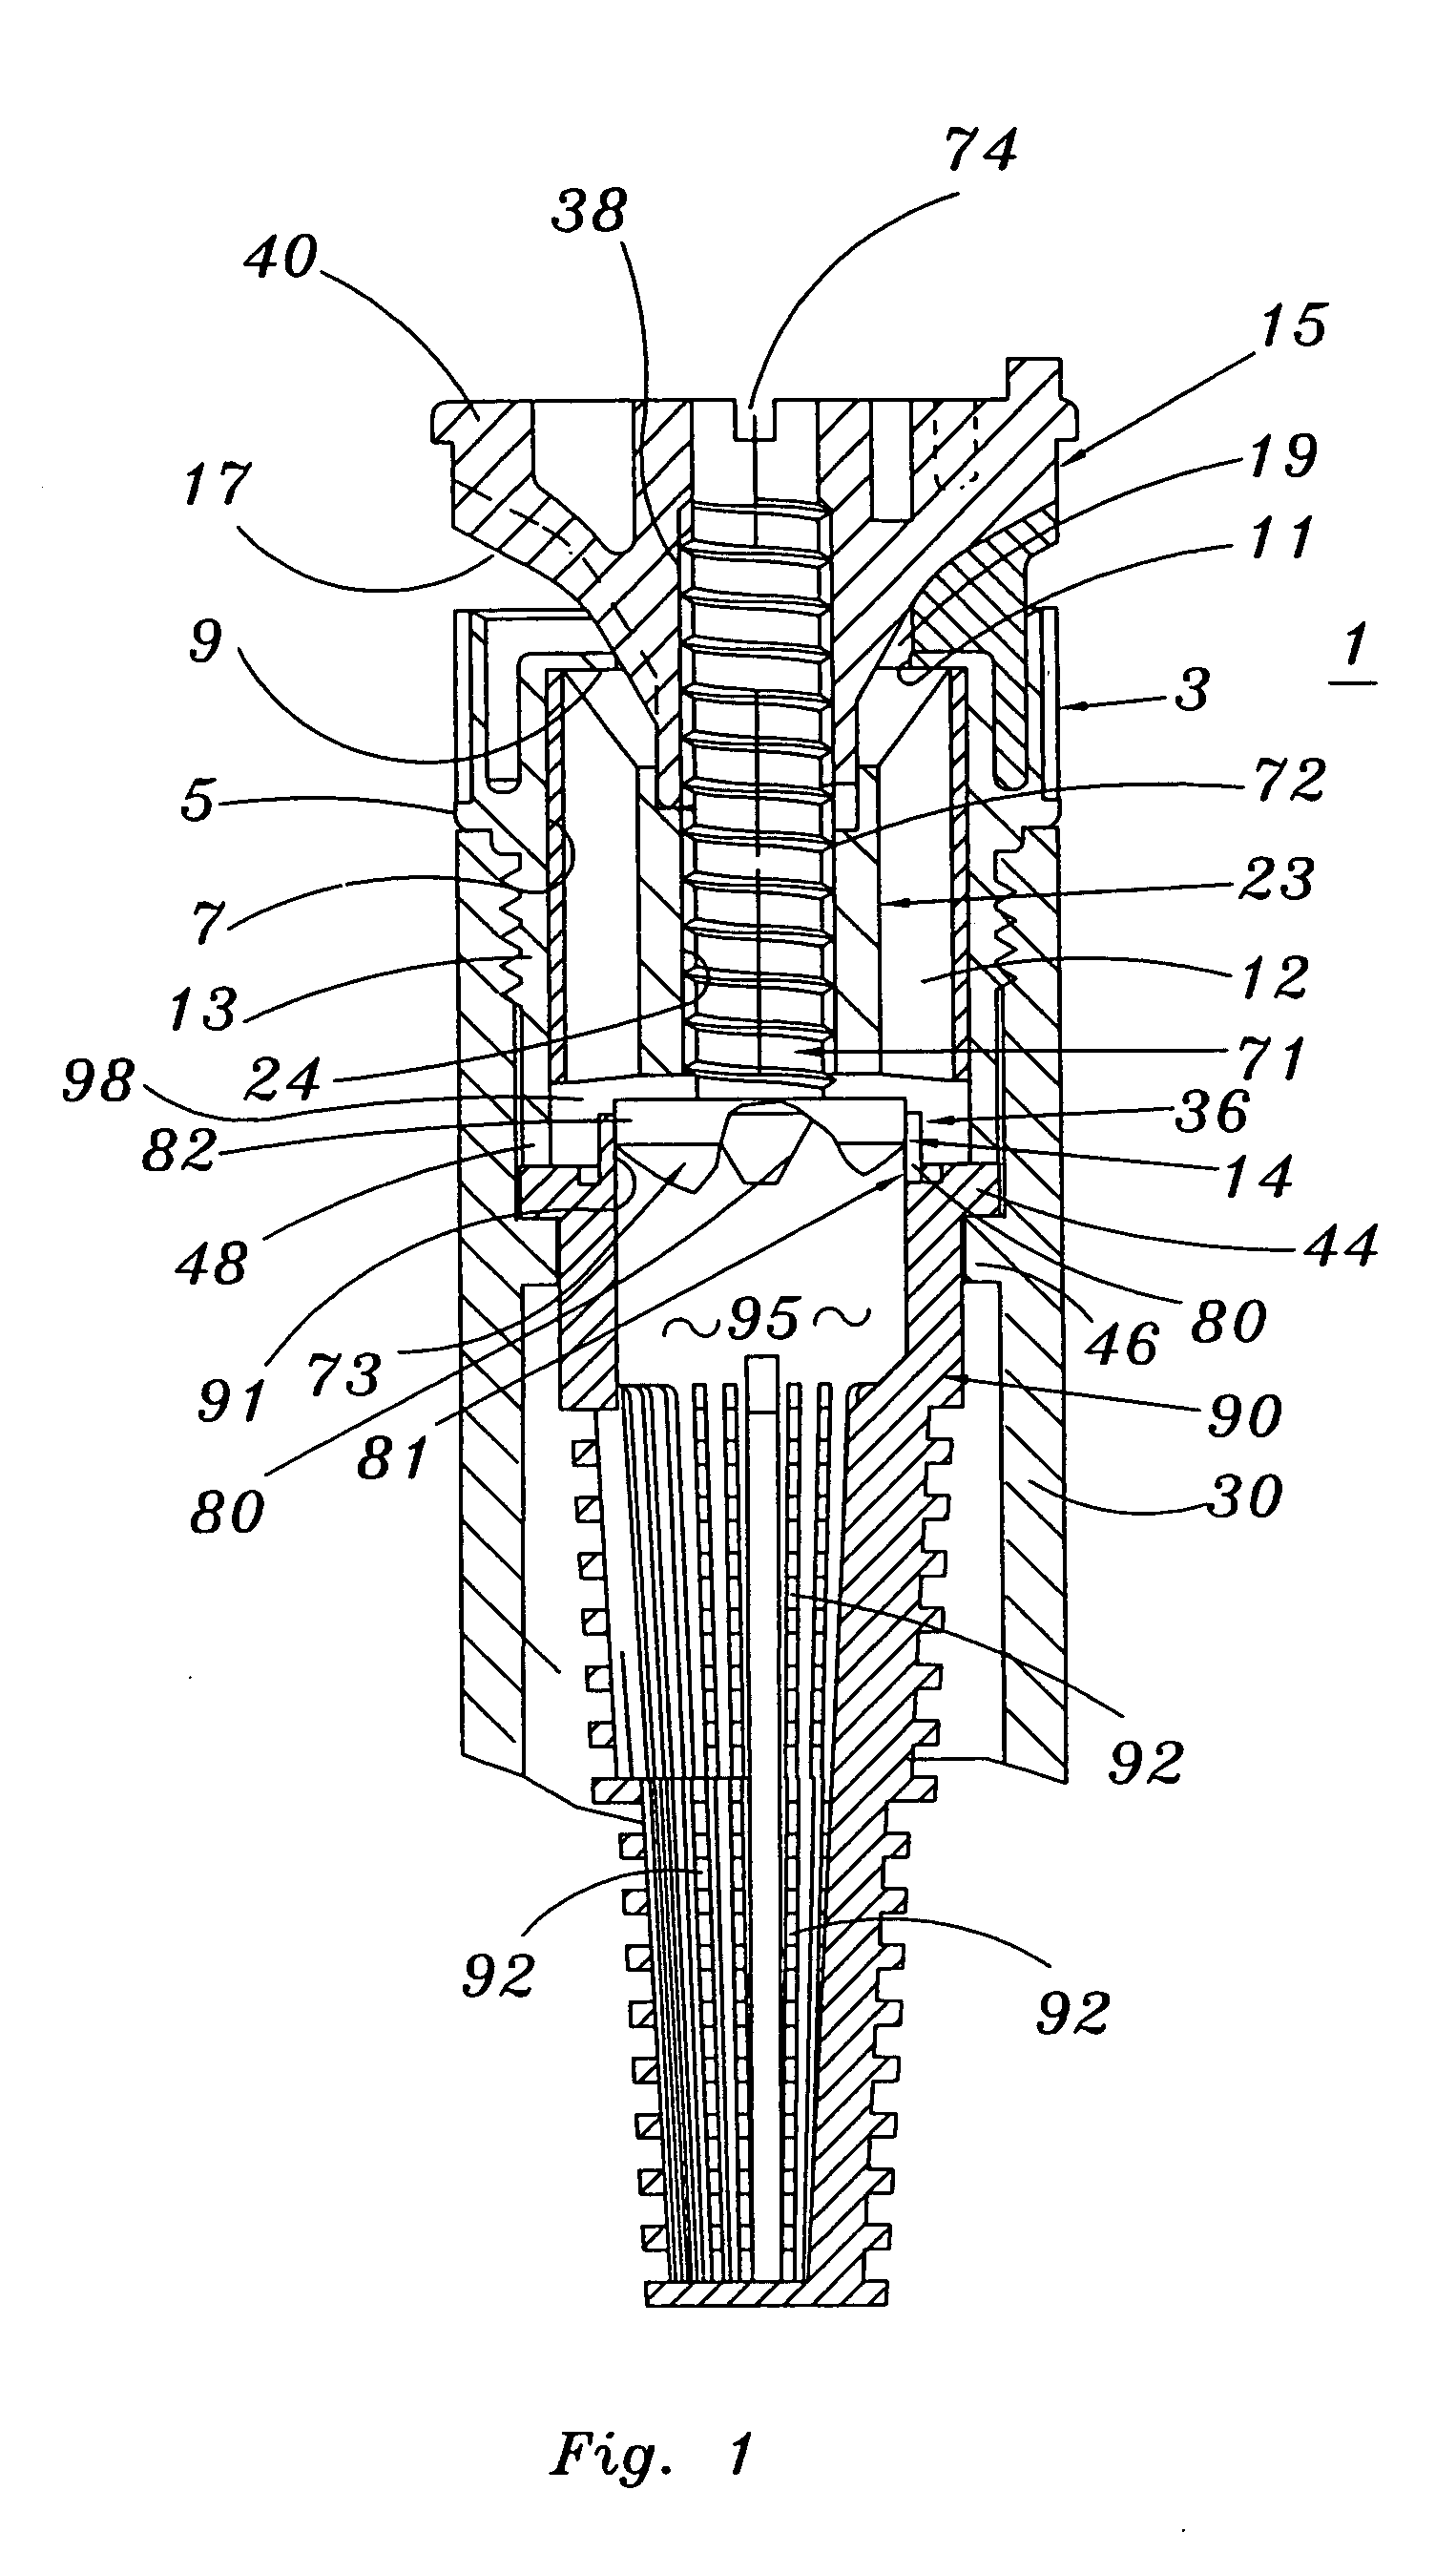 Selected range arc settable spray nozzle with pre-set proportional connected upstream flow throttling